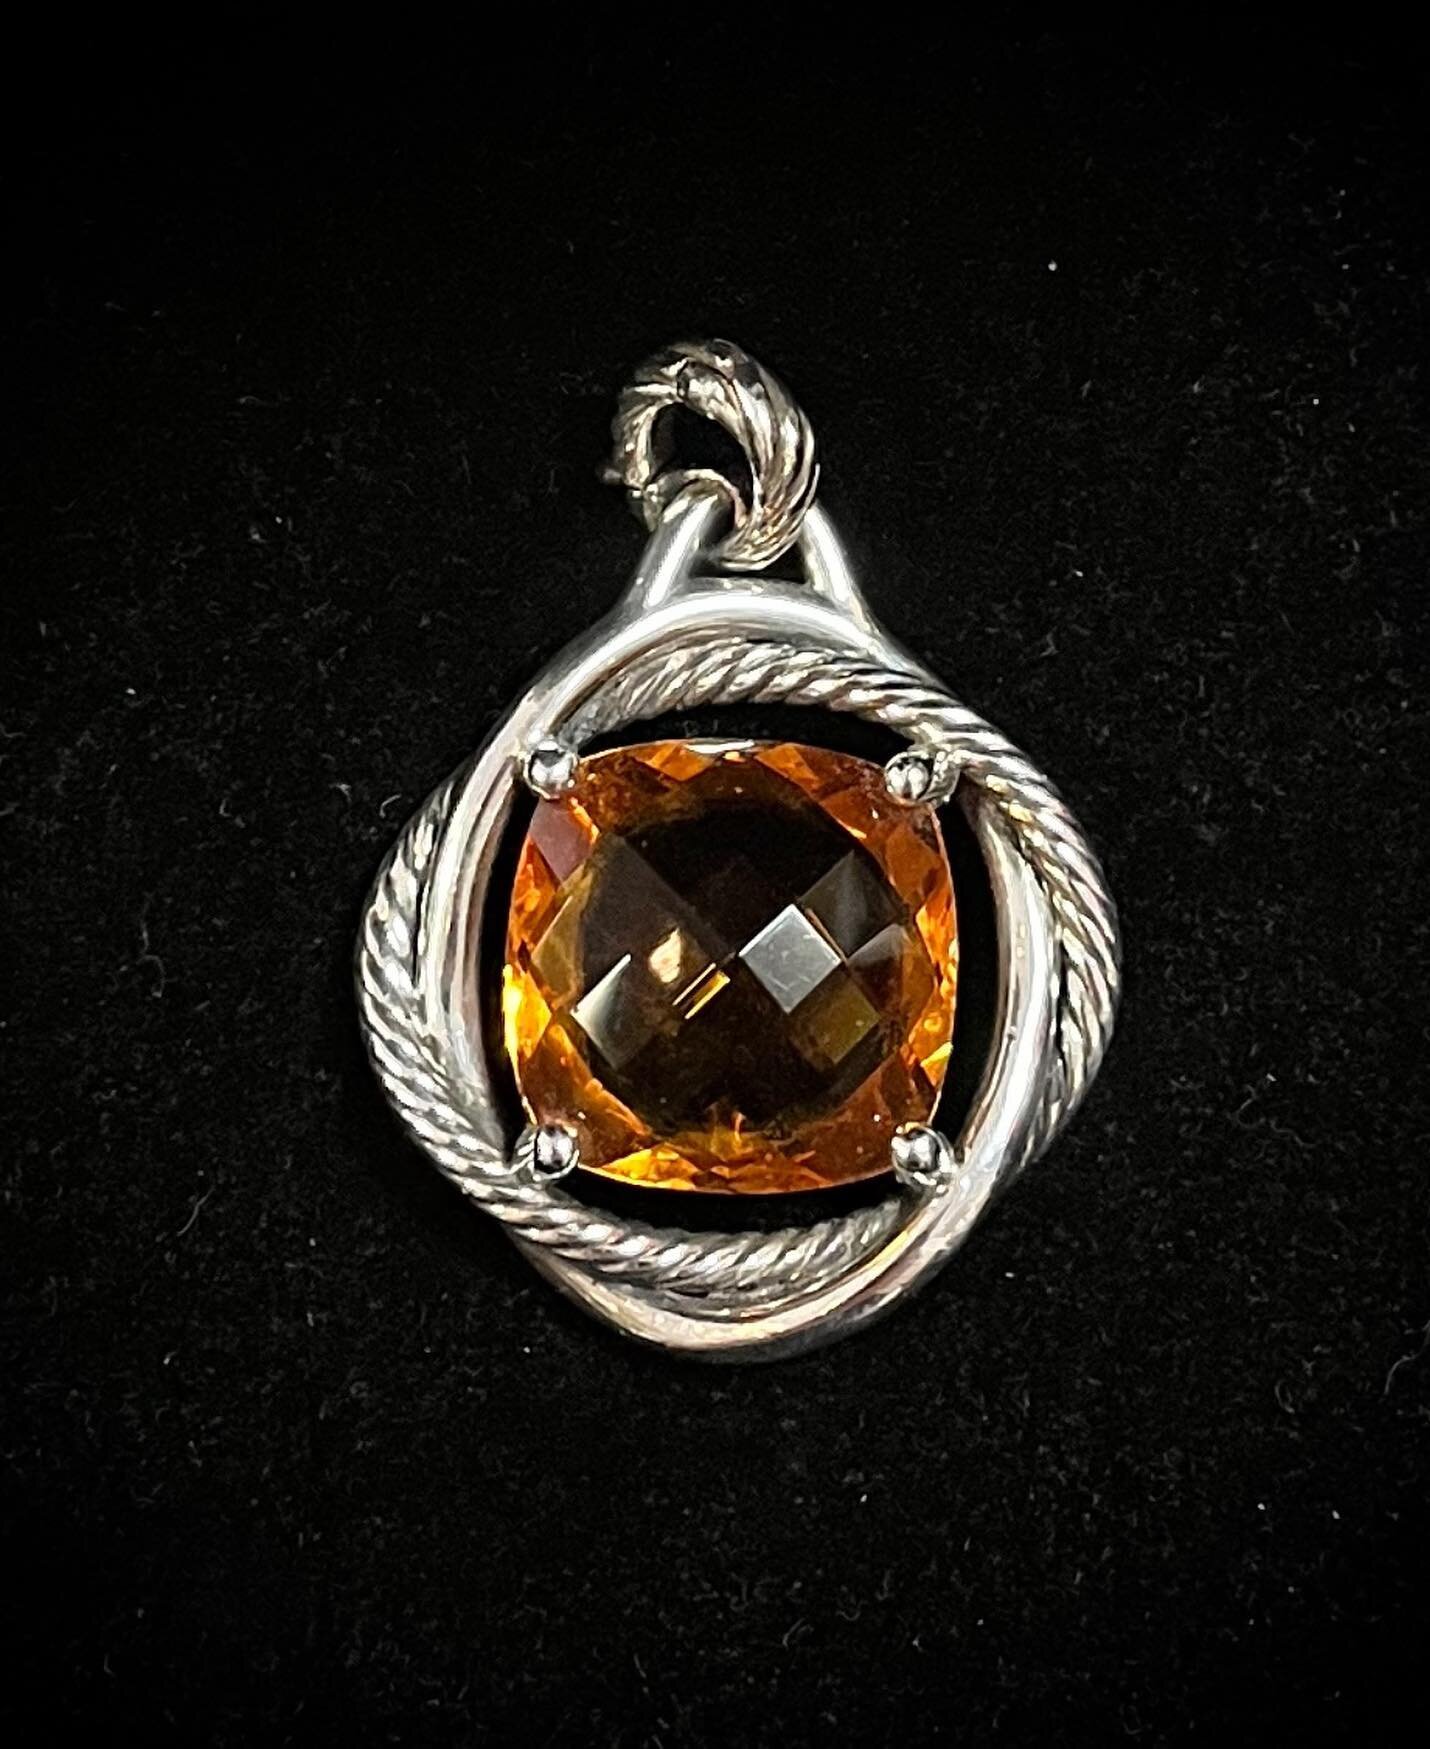 This is our first consignment (in 14 years) of David Yurman jewelry. Lemon Citrine and sterling silver pendant. (Does not have chain) Gorgeous 😍 $89
.
.
#uptownattic #designerconsignment #davidyurman #sterlingsilver #lemoncitrine #citrine #pendant #